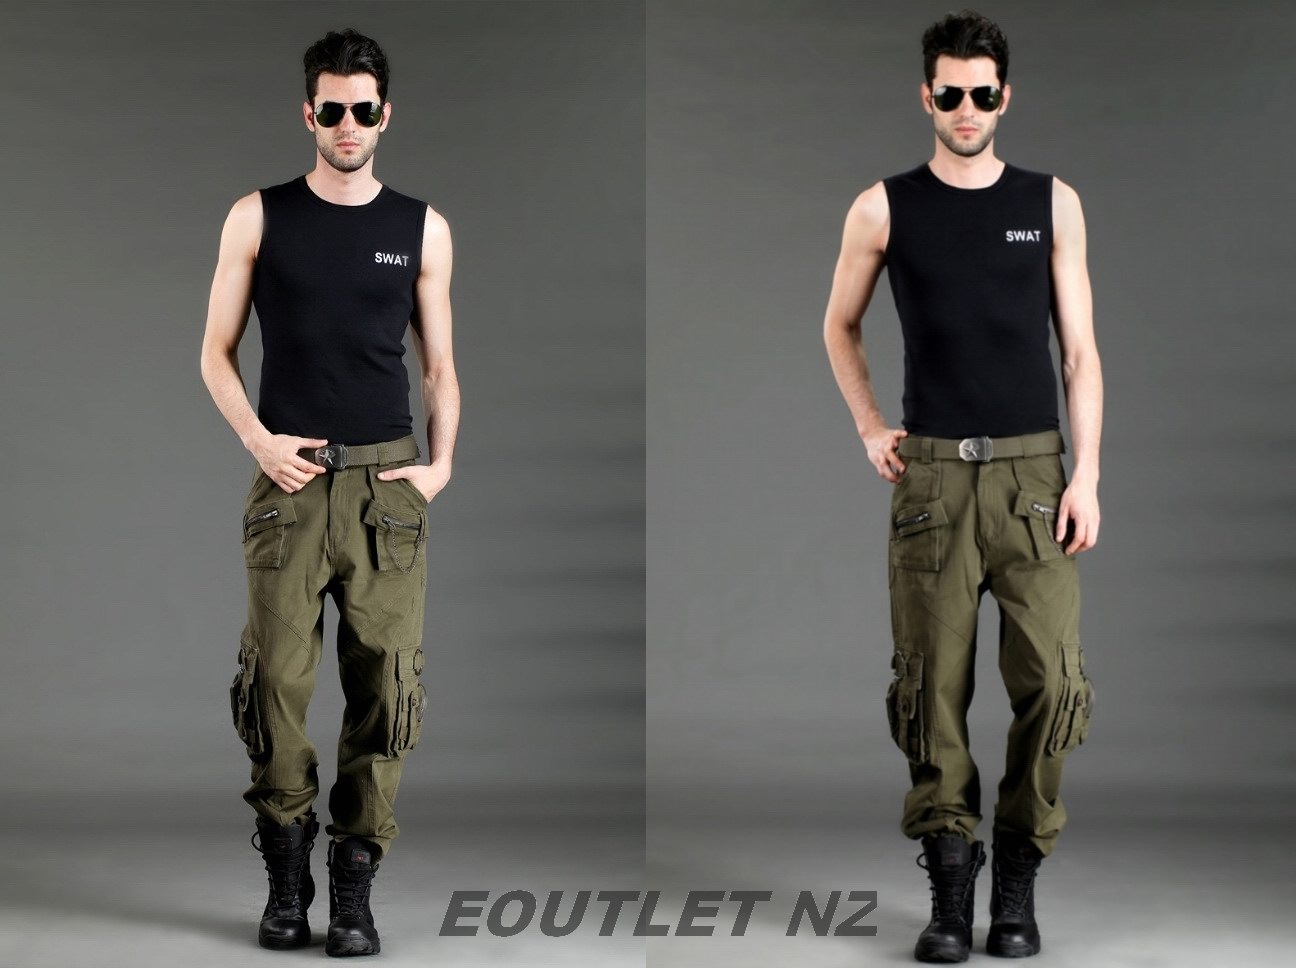 FR.Knight Casual Tactical Military Army Combat Style Pants OD